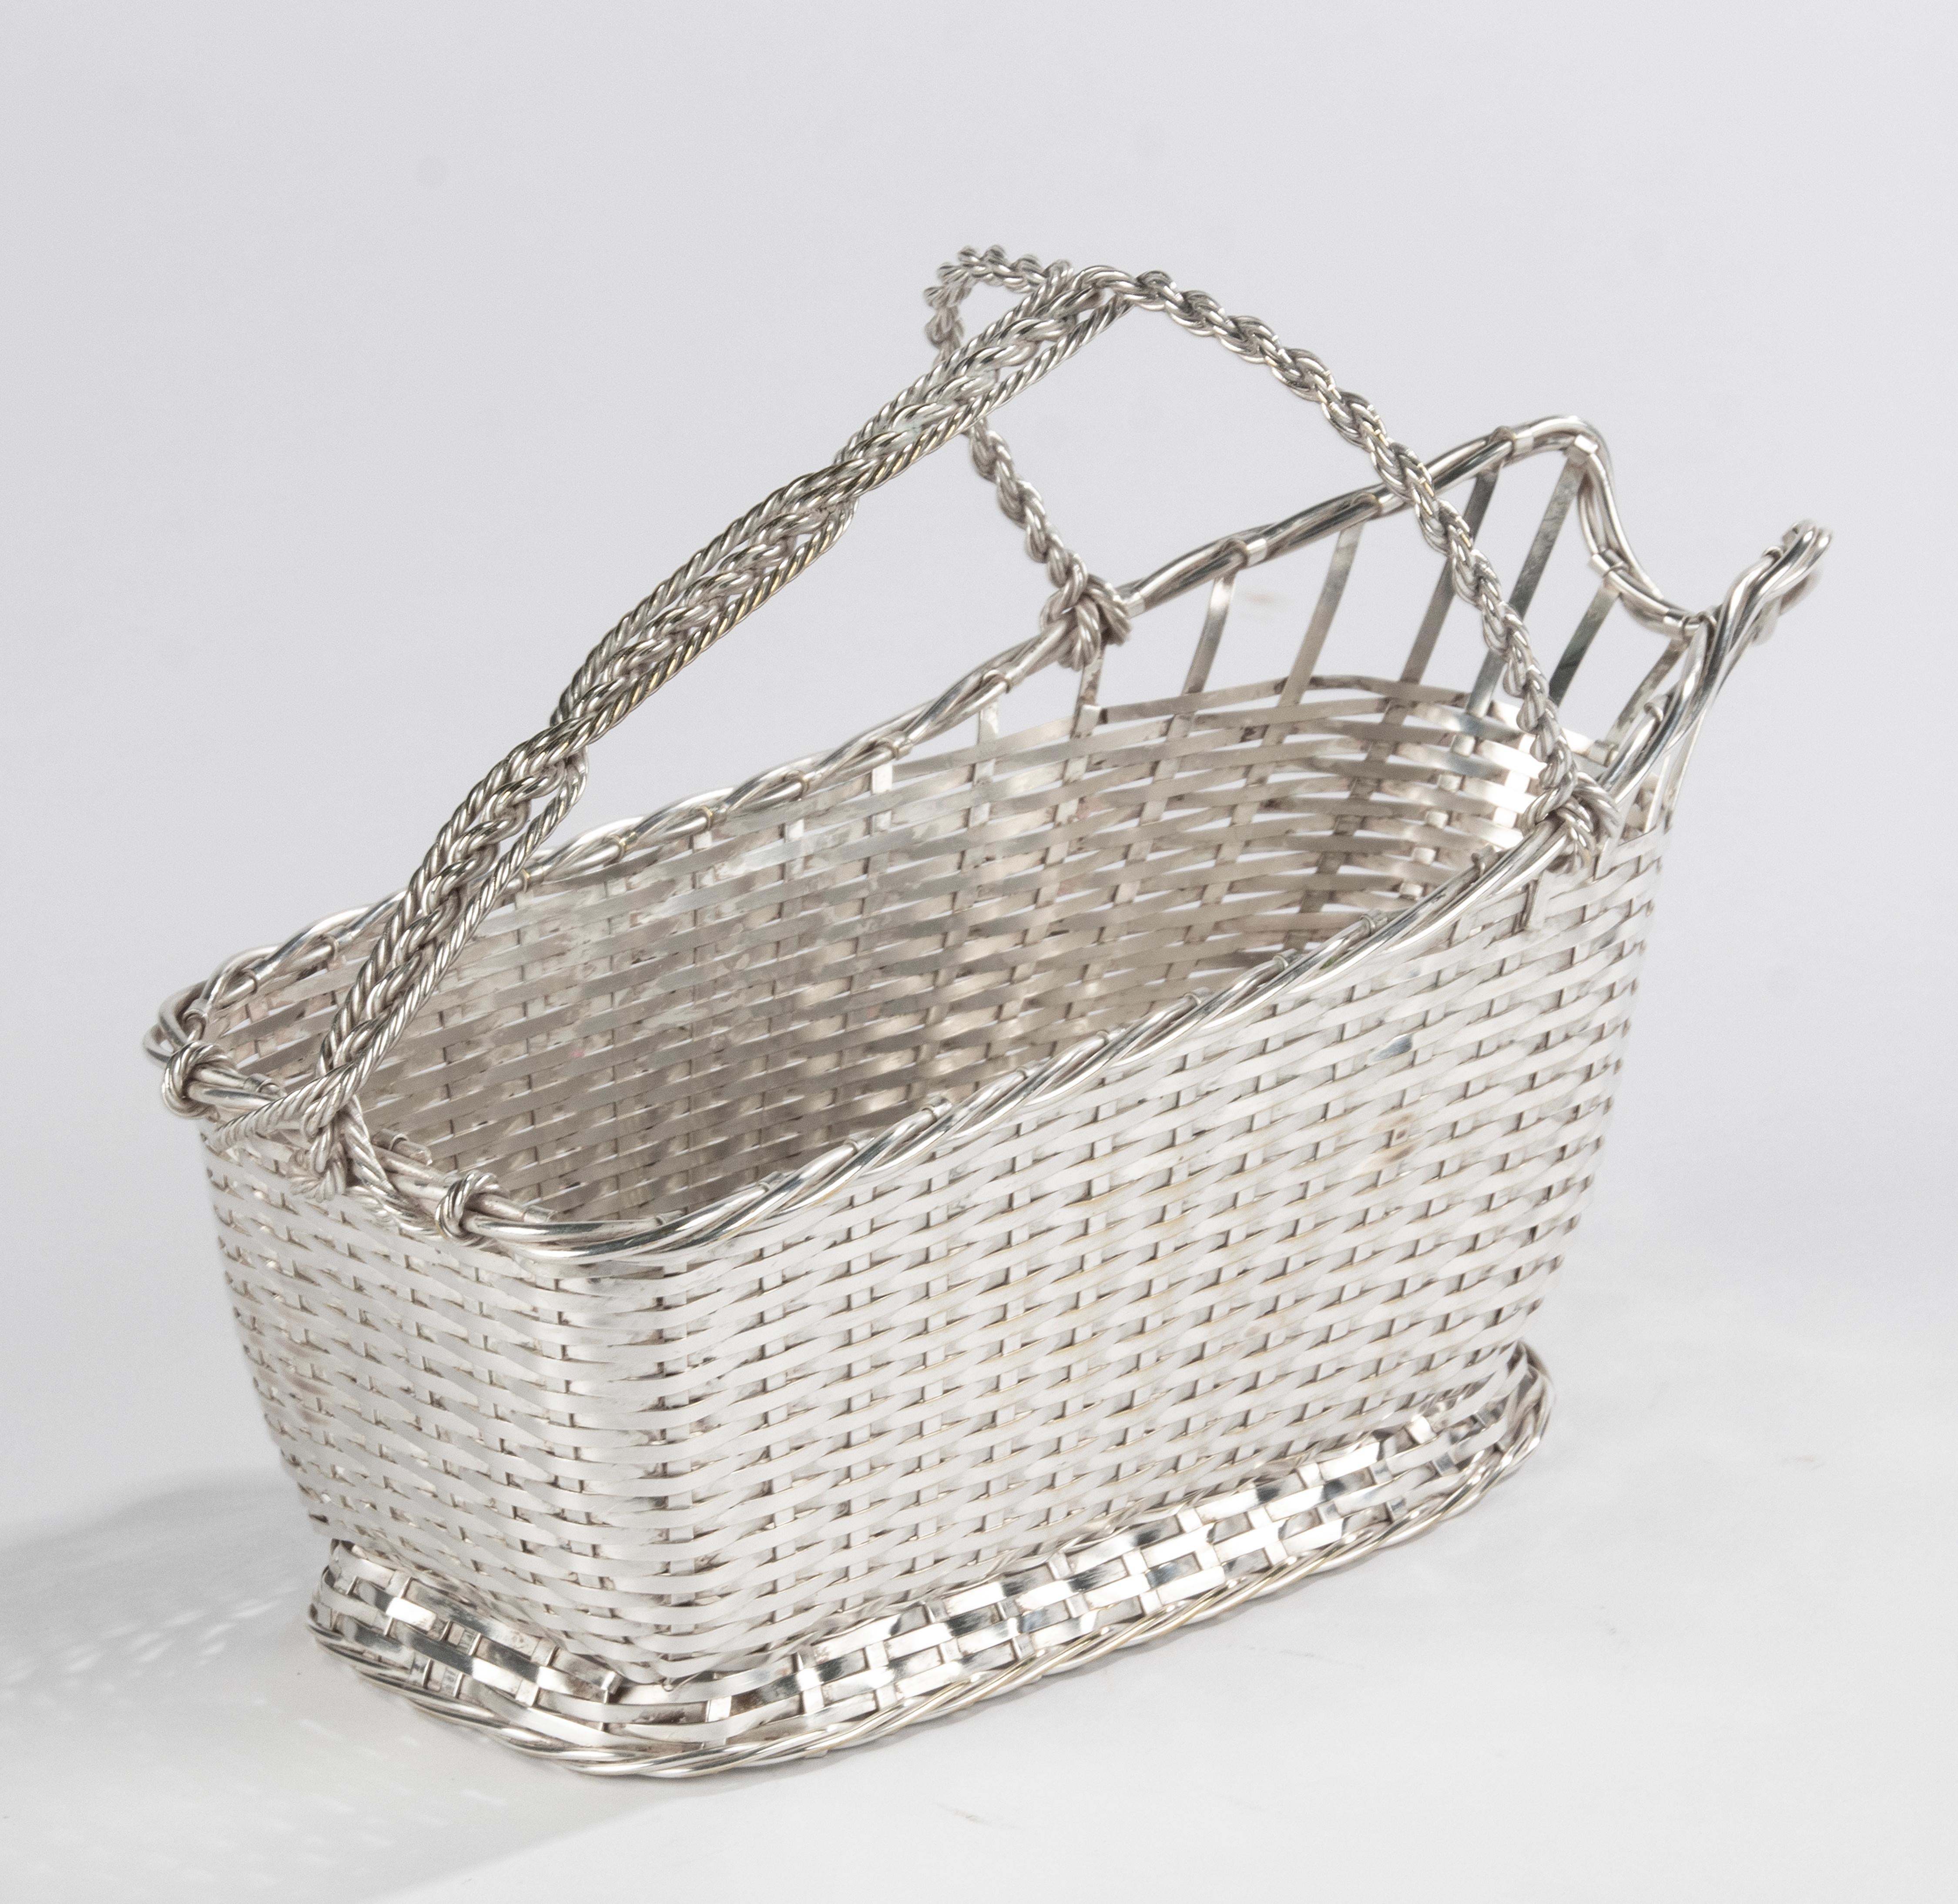 Silver Plated Wicker Wine Serving Basket - Christofle France In Good Condition For Sale In Casteren, Noord-Brabant